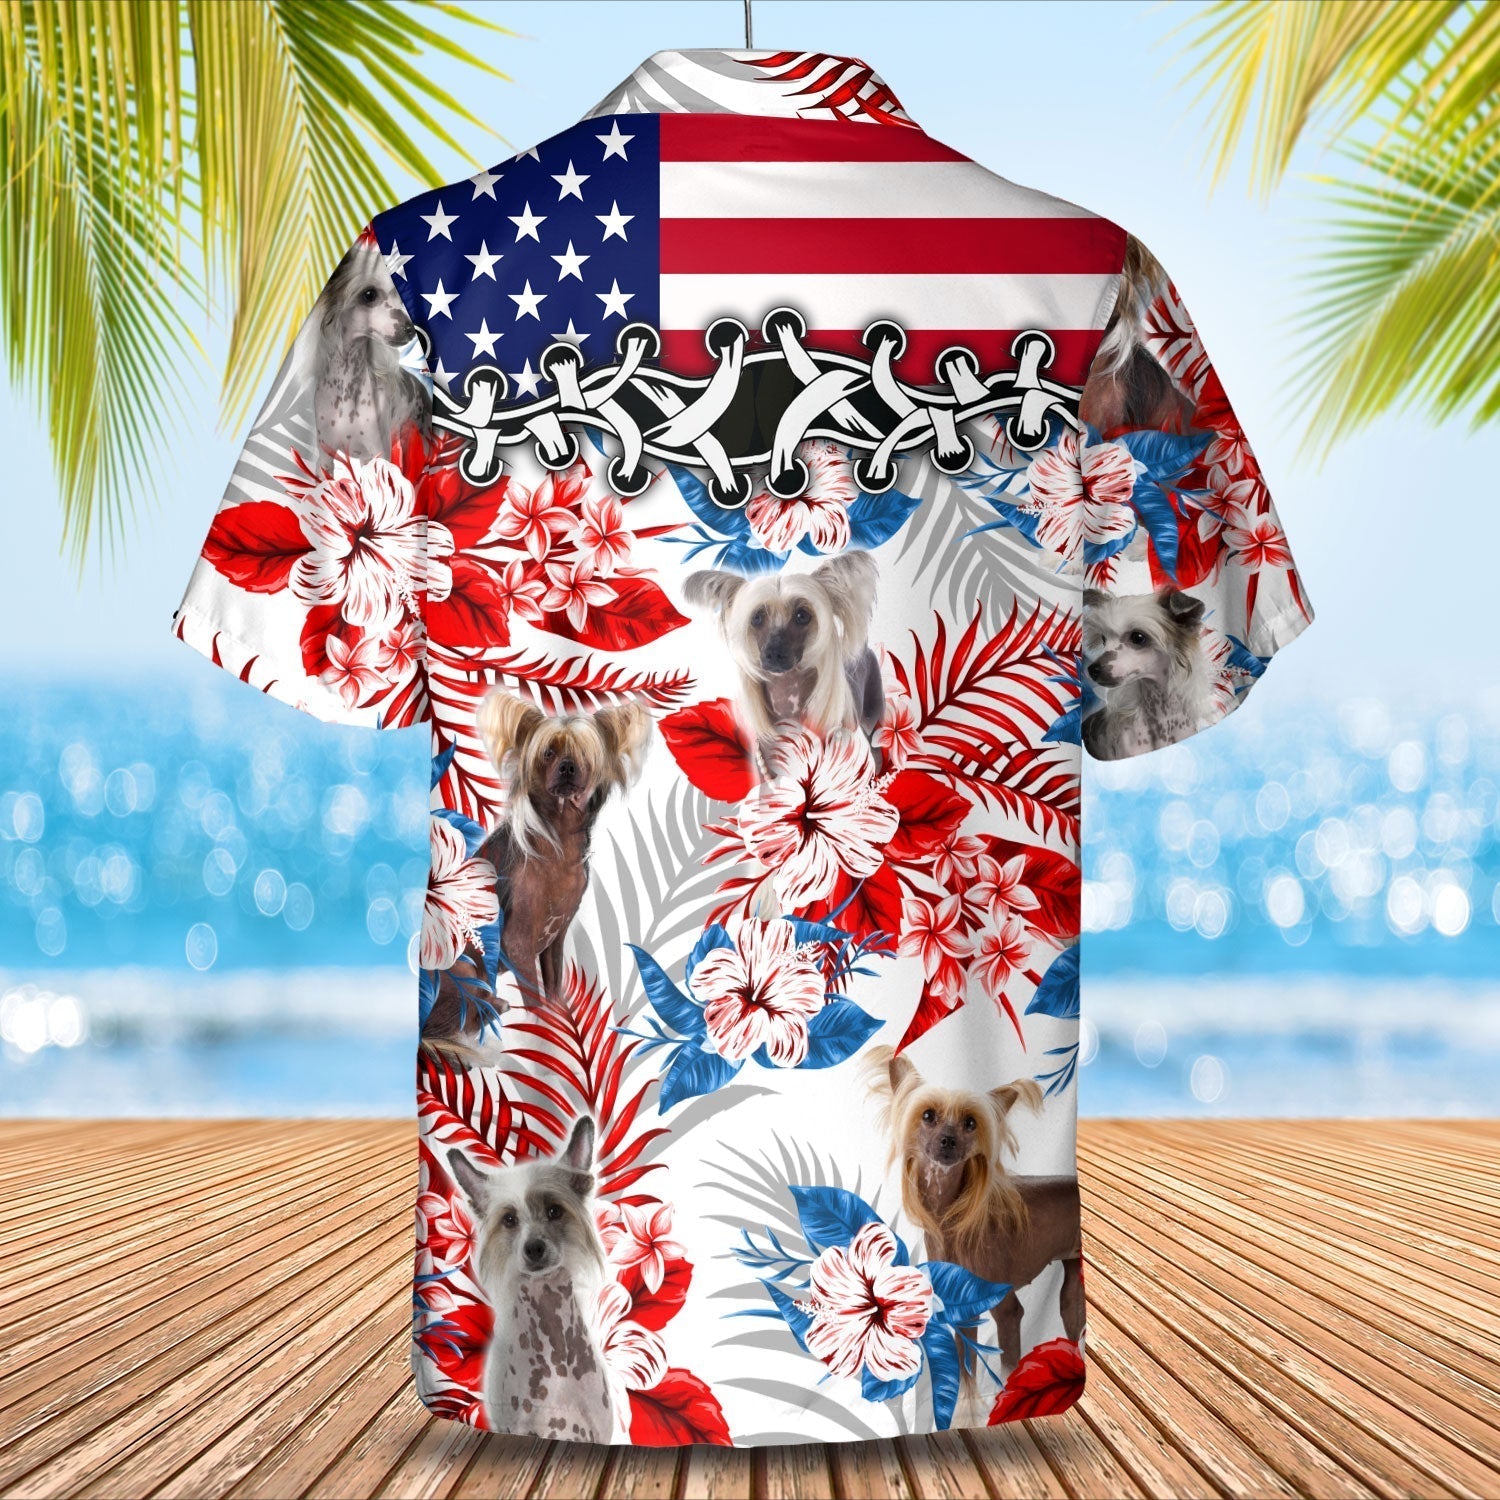 Chinese Crested Hawaiian Shirt -  Gift for Summer/ Summer aloha shirt/ Hawaiian shirt for Men and women